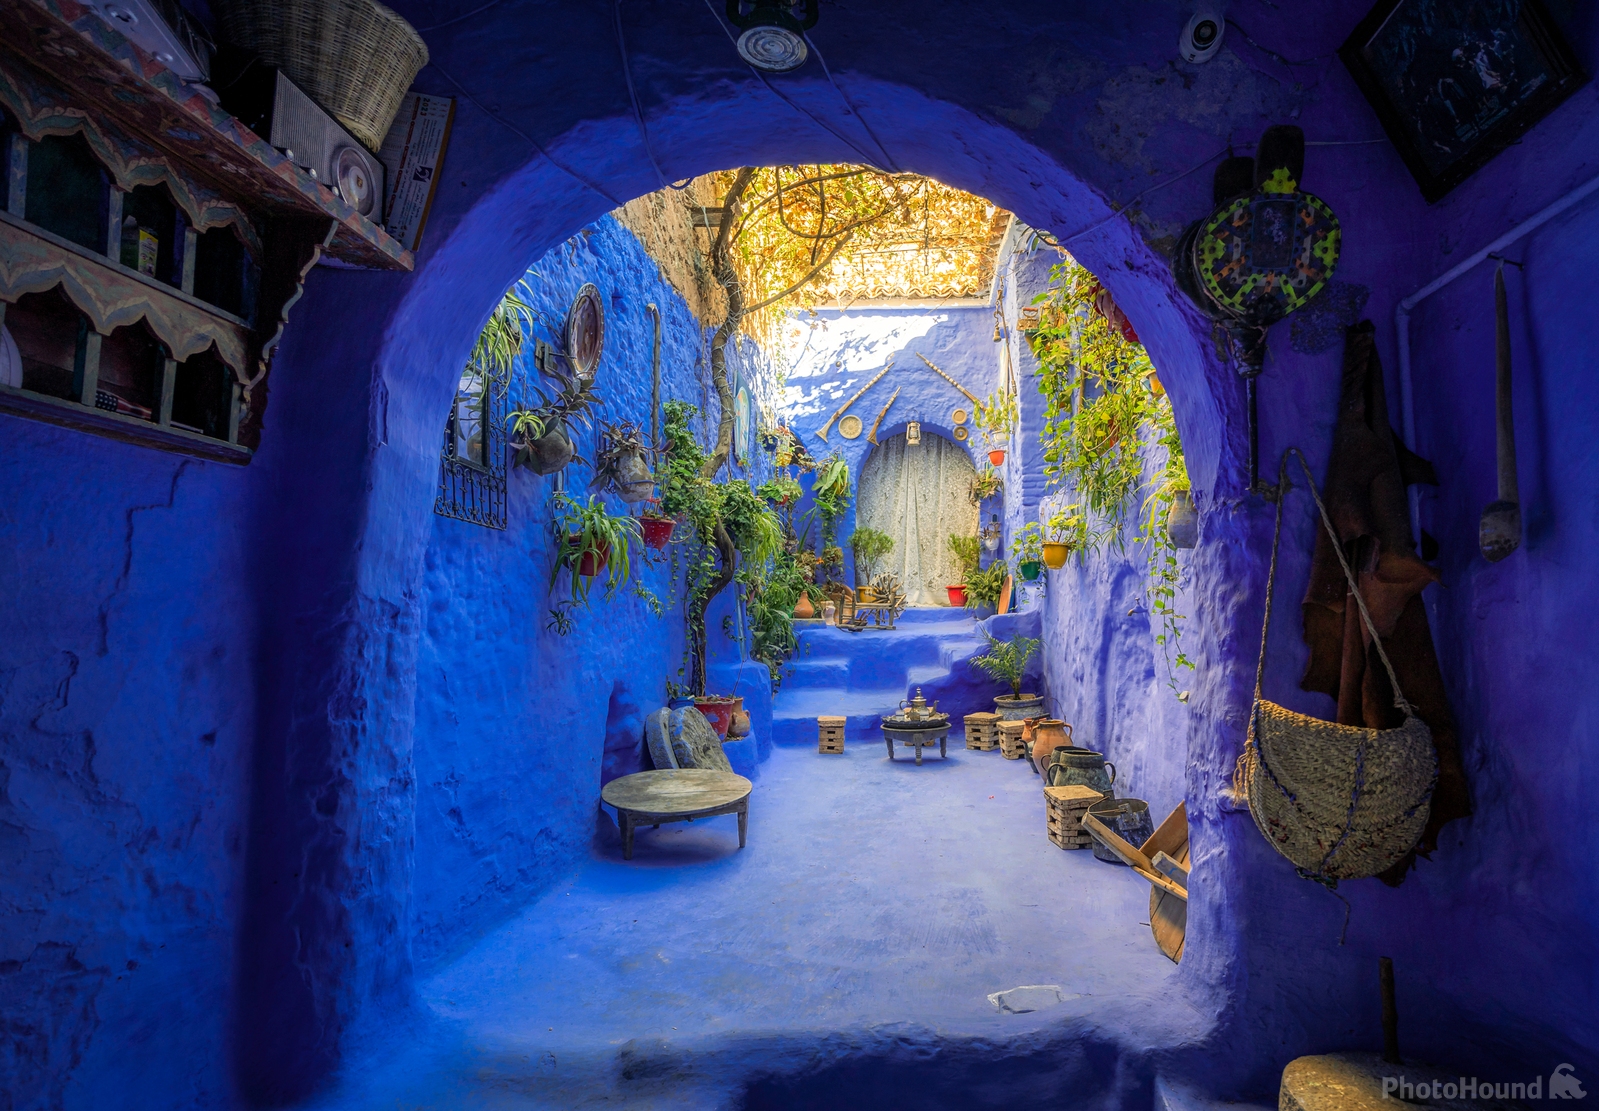 Image of Chefchaouen Old Town by Jakub Bors